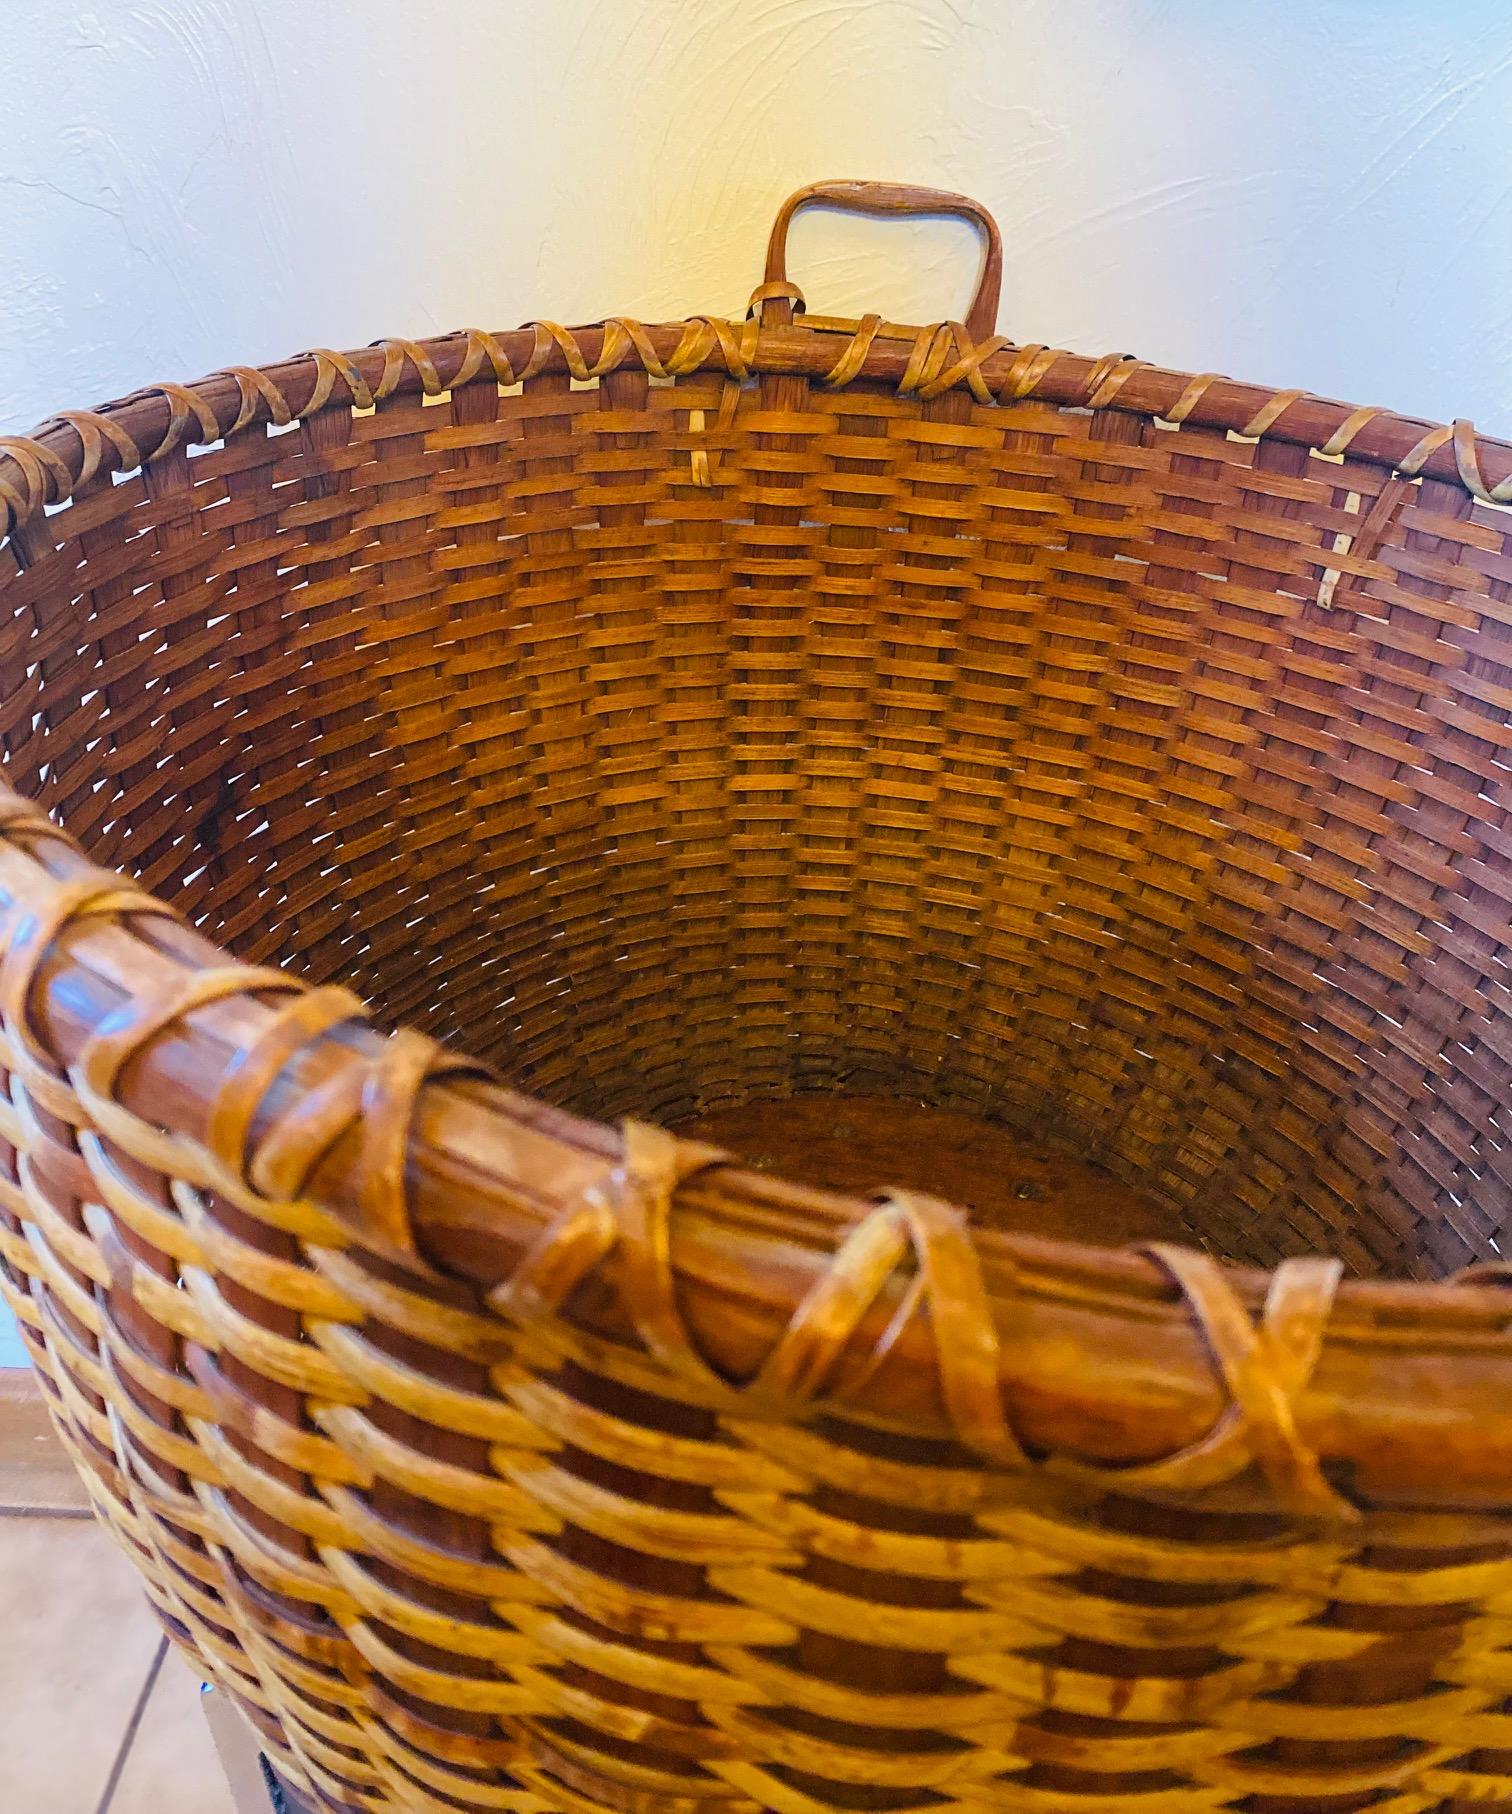 Very rare 19th century Nantucket Lightship Bushel Basket by George C. Gardner of Nantucket Island (1809 - 1889), an oversized round open basket handcrafted with a fat rattan weave on wide wooden splint staves, a carved wooden heart-shaped handle